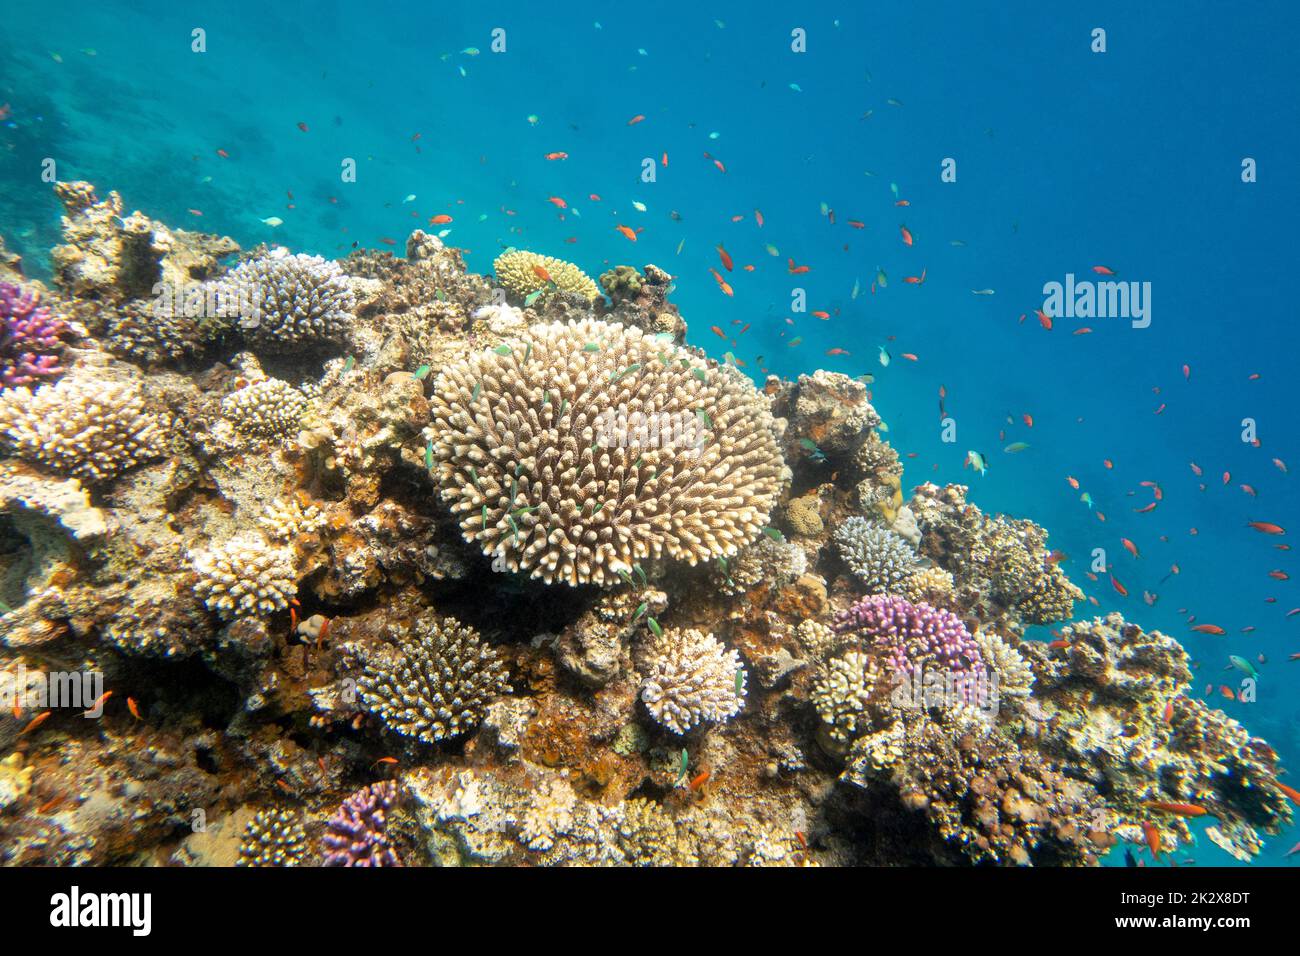 Colorful, picturesque coral reef at the sandy bottom of tropical sea ...